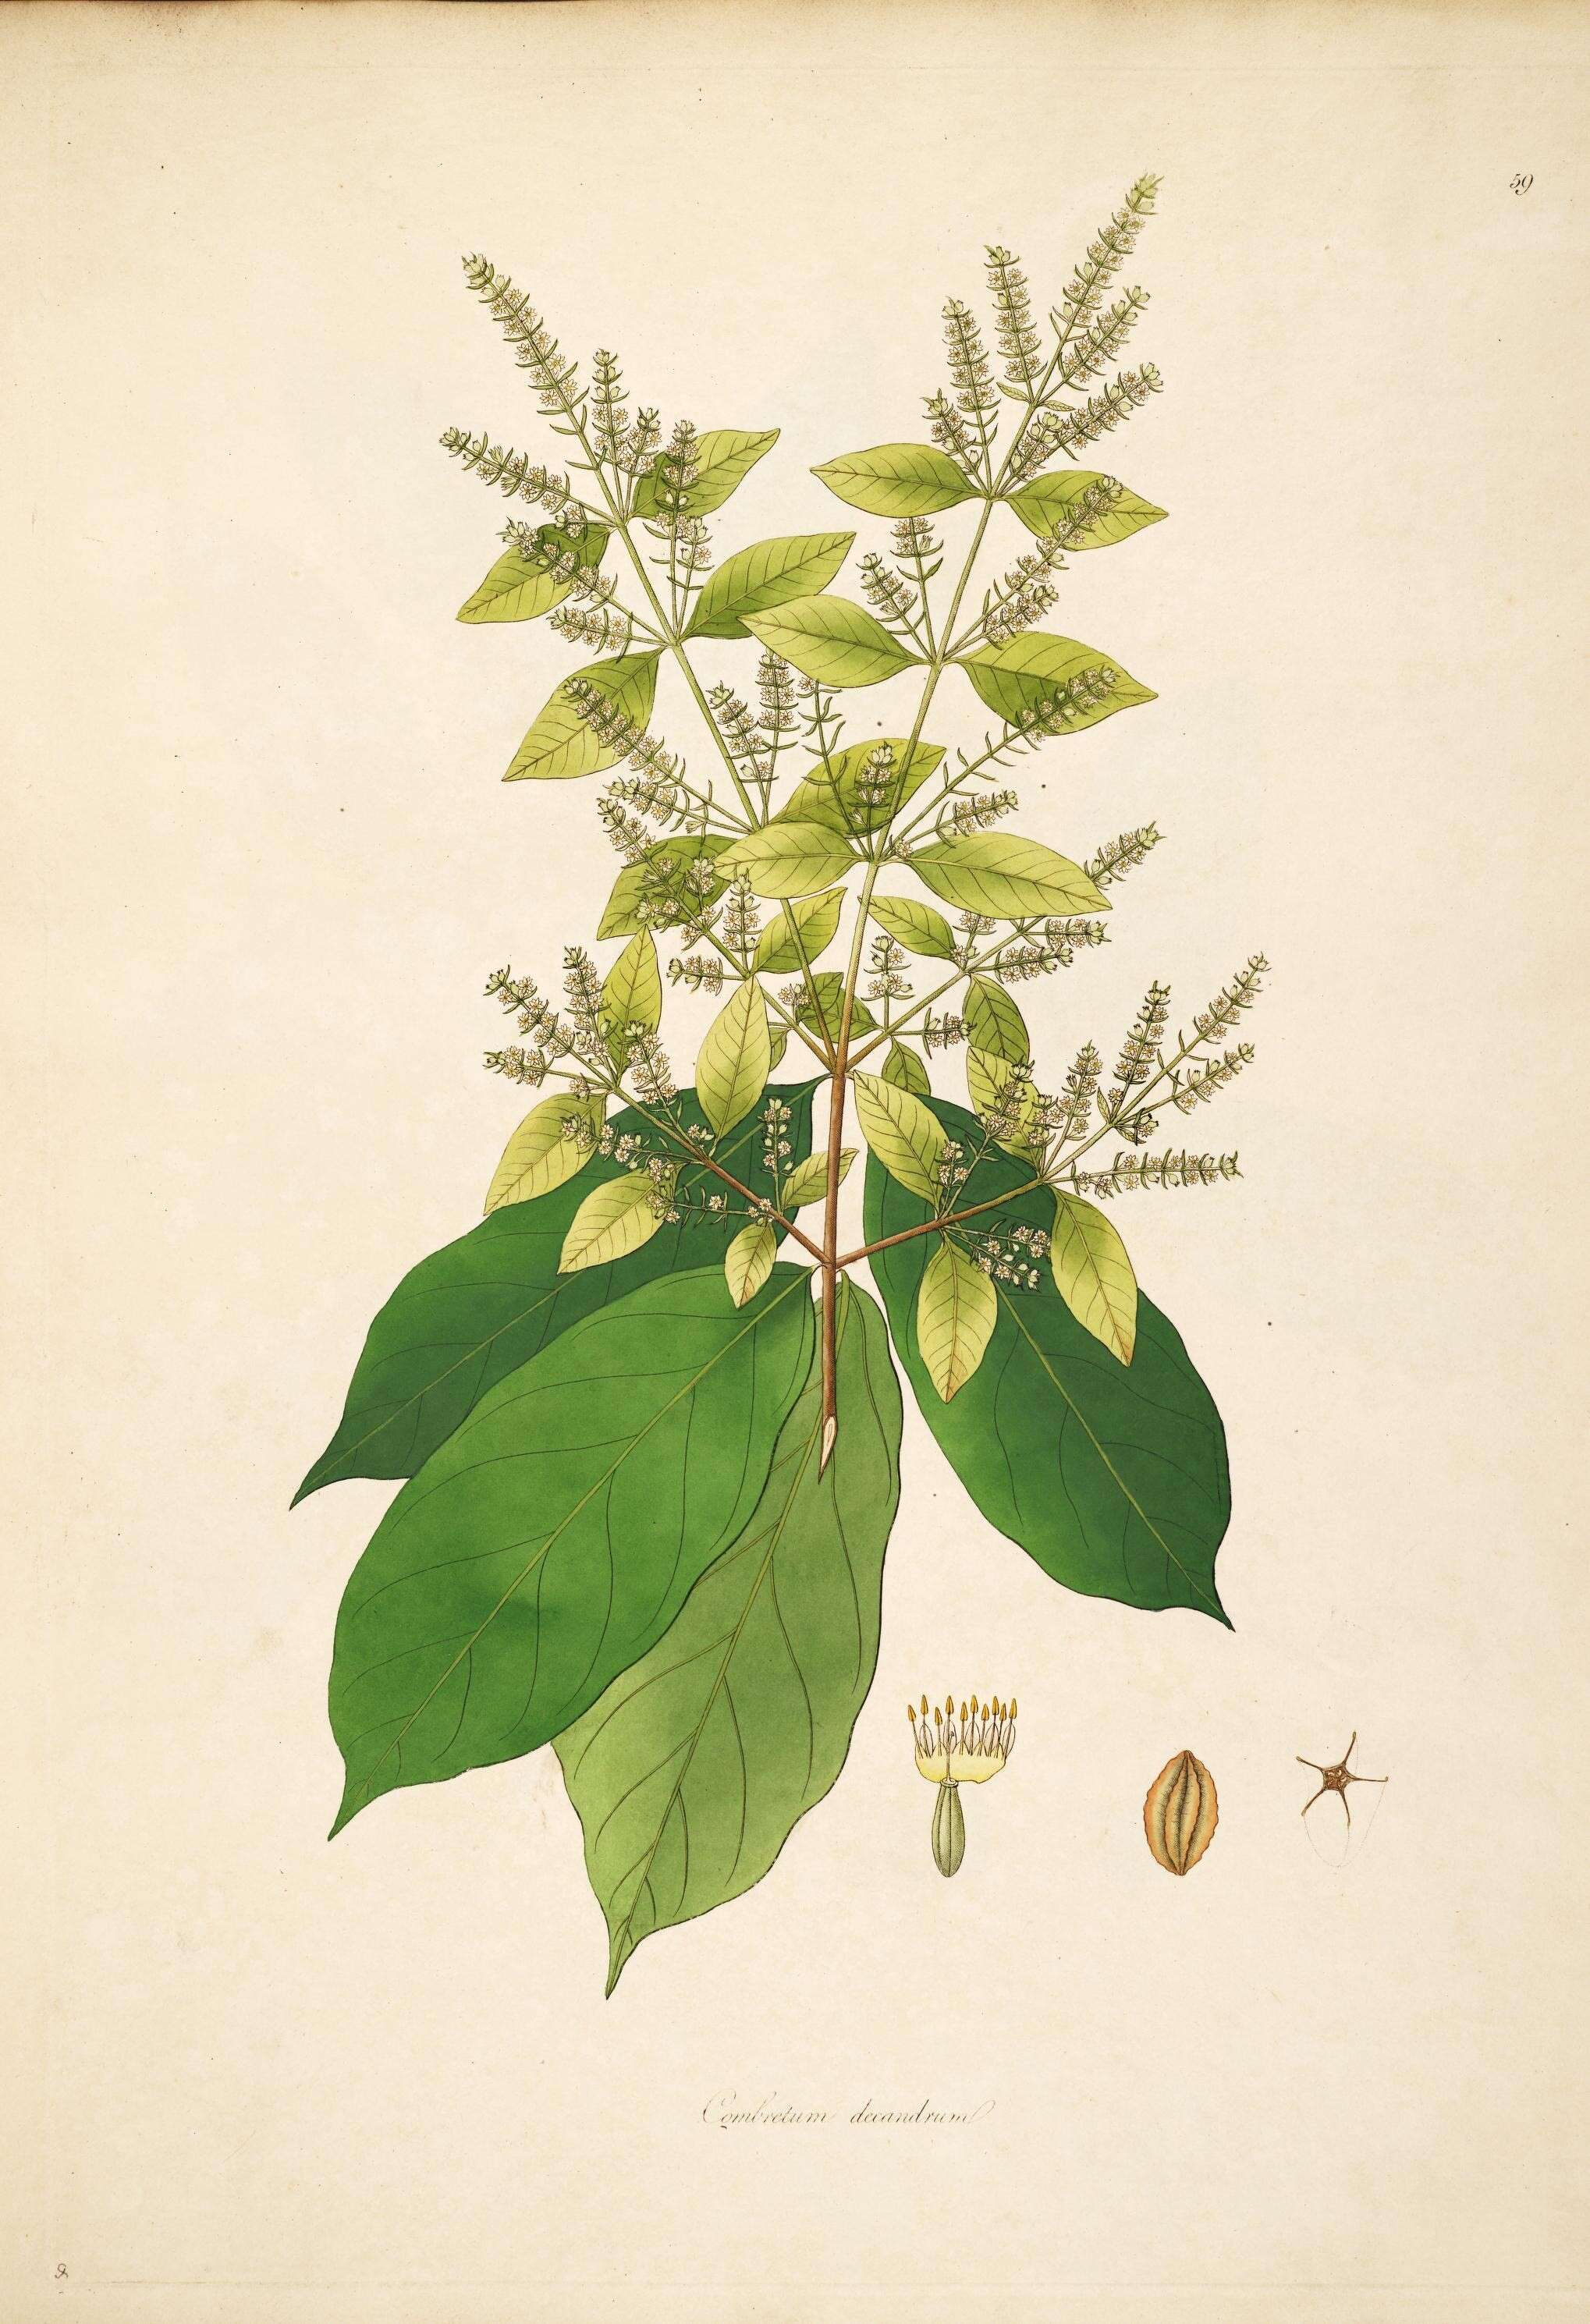 Image of combretum family